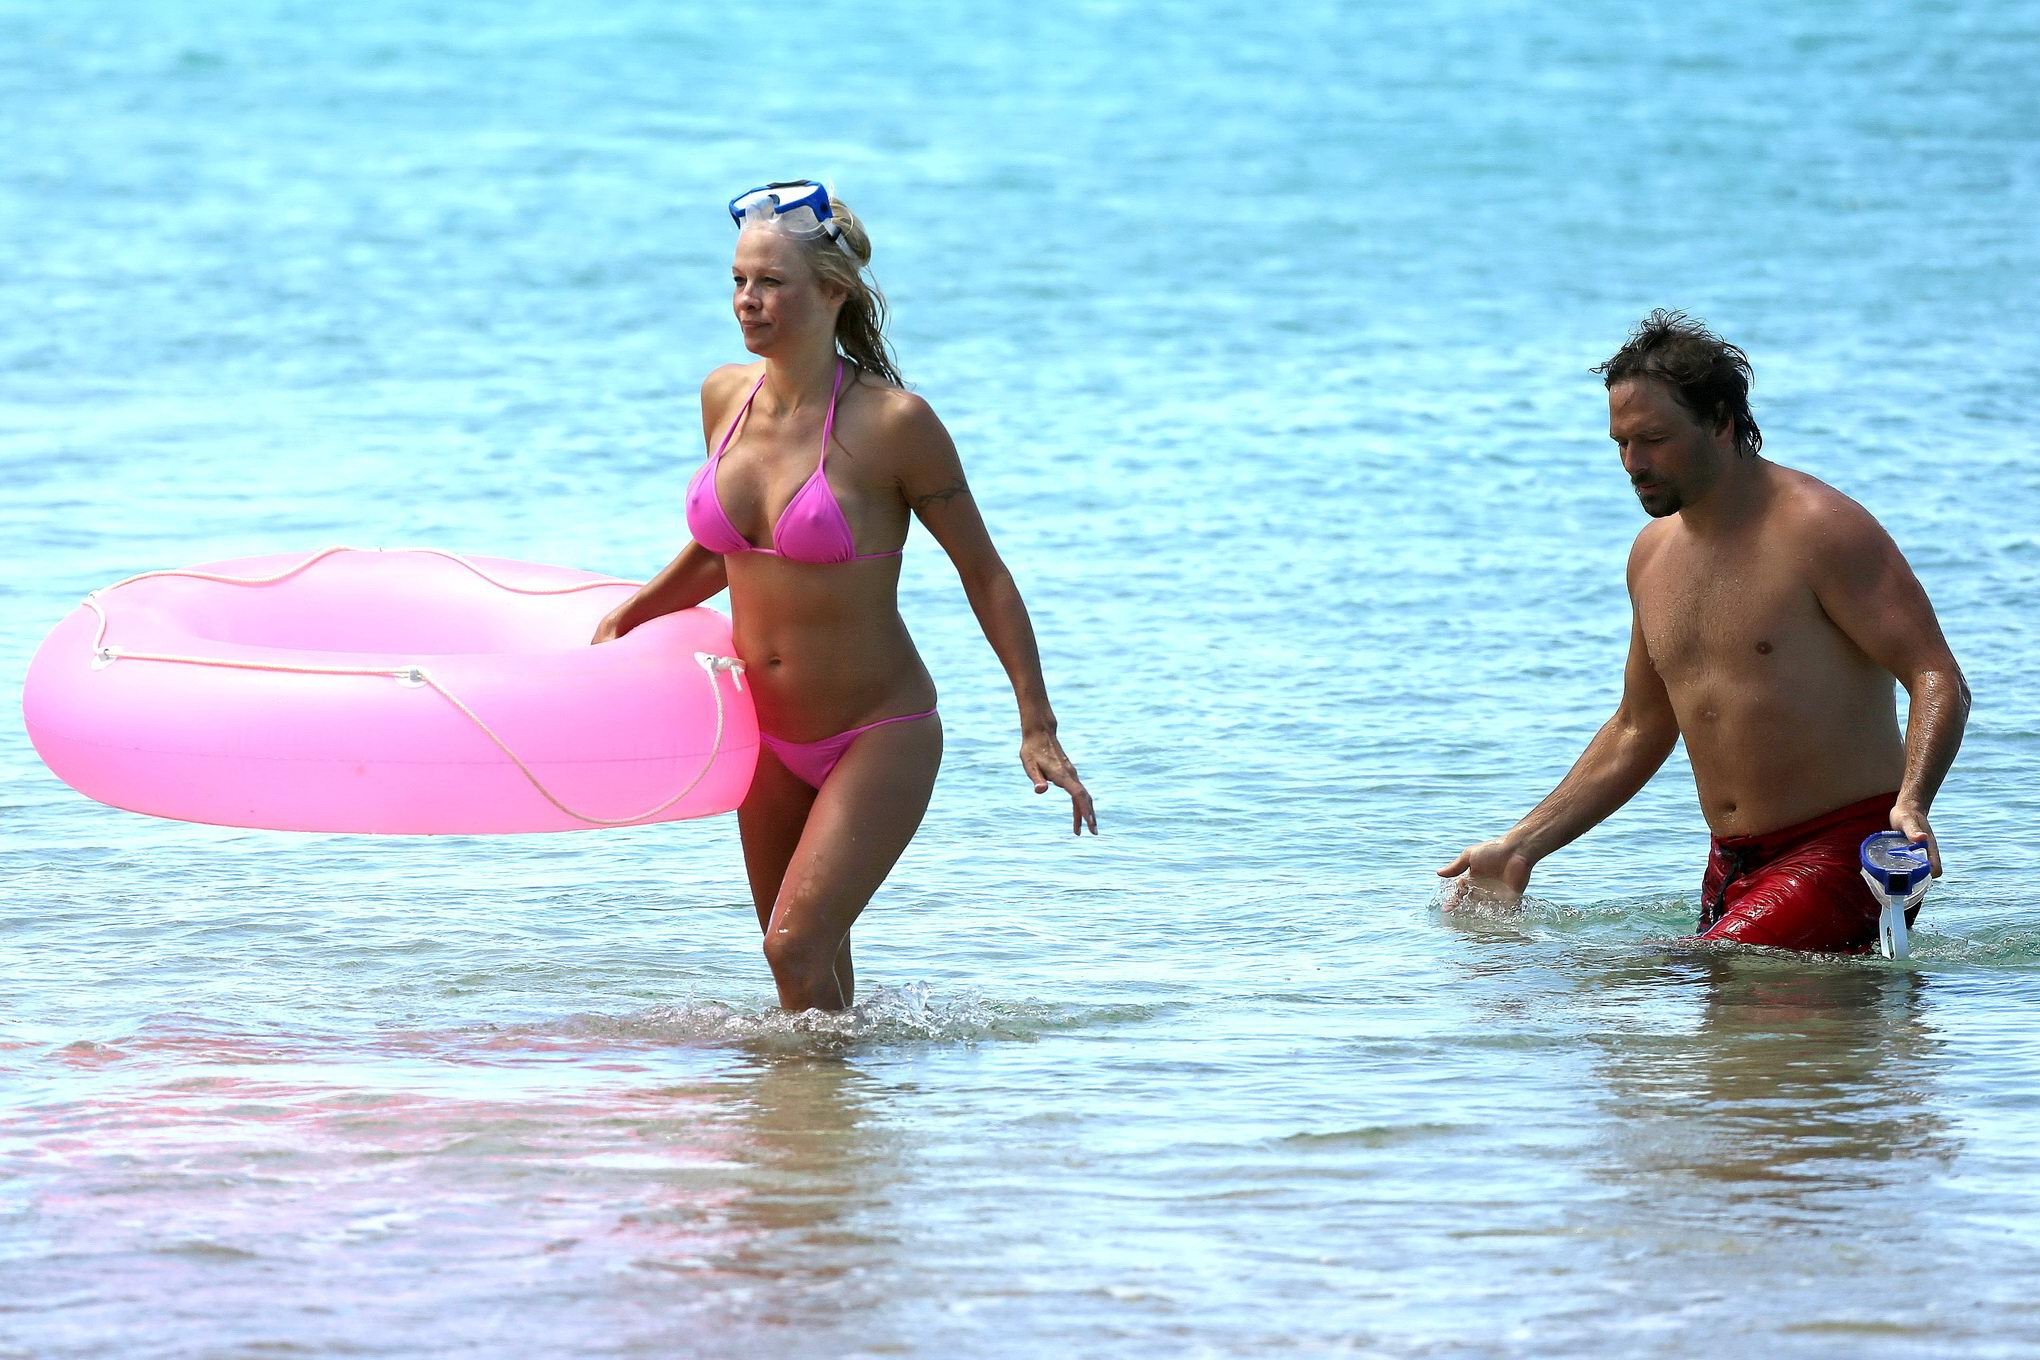 Busty Pamela Anderson showing pokies in a wet pink bikini while snorkeling on a  #75221519